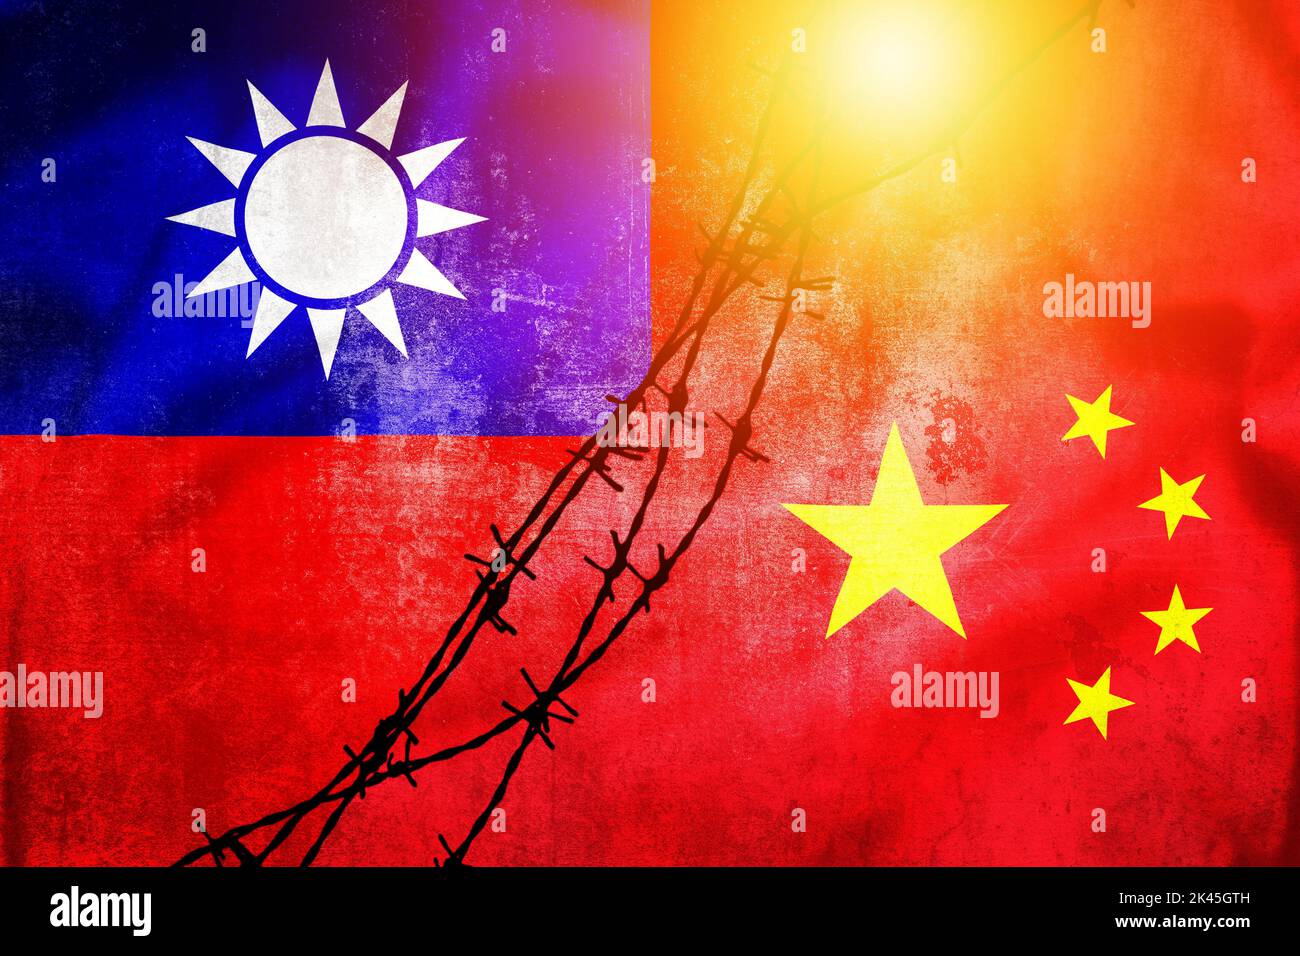 Grunge flags of Taiwan and China divided by barb wire sun haze illustration, concept of tense relations between Taiwan and China Stock Photo